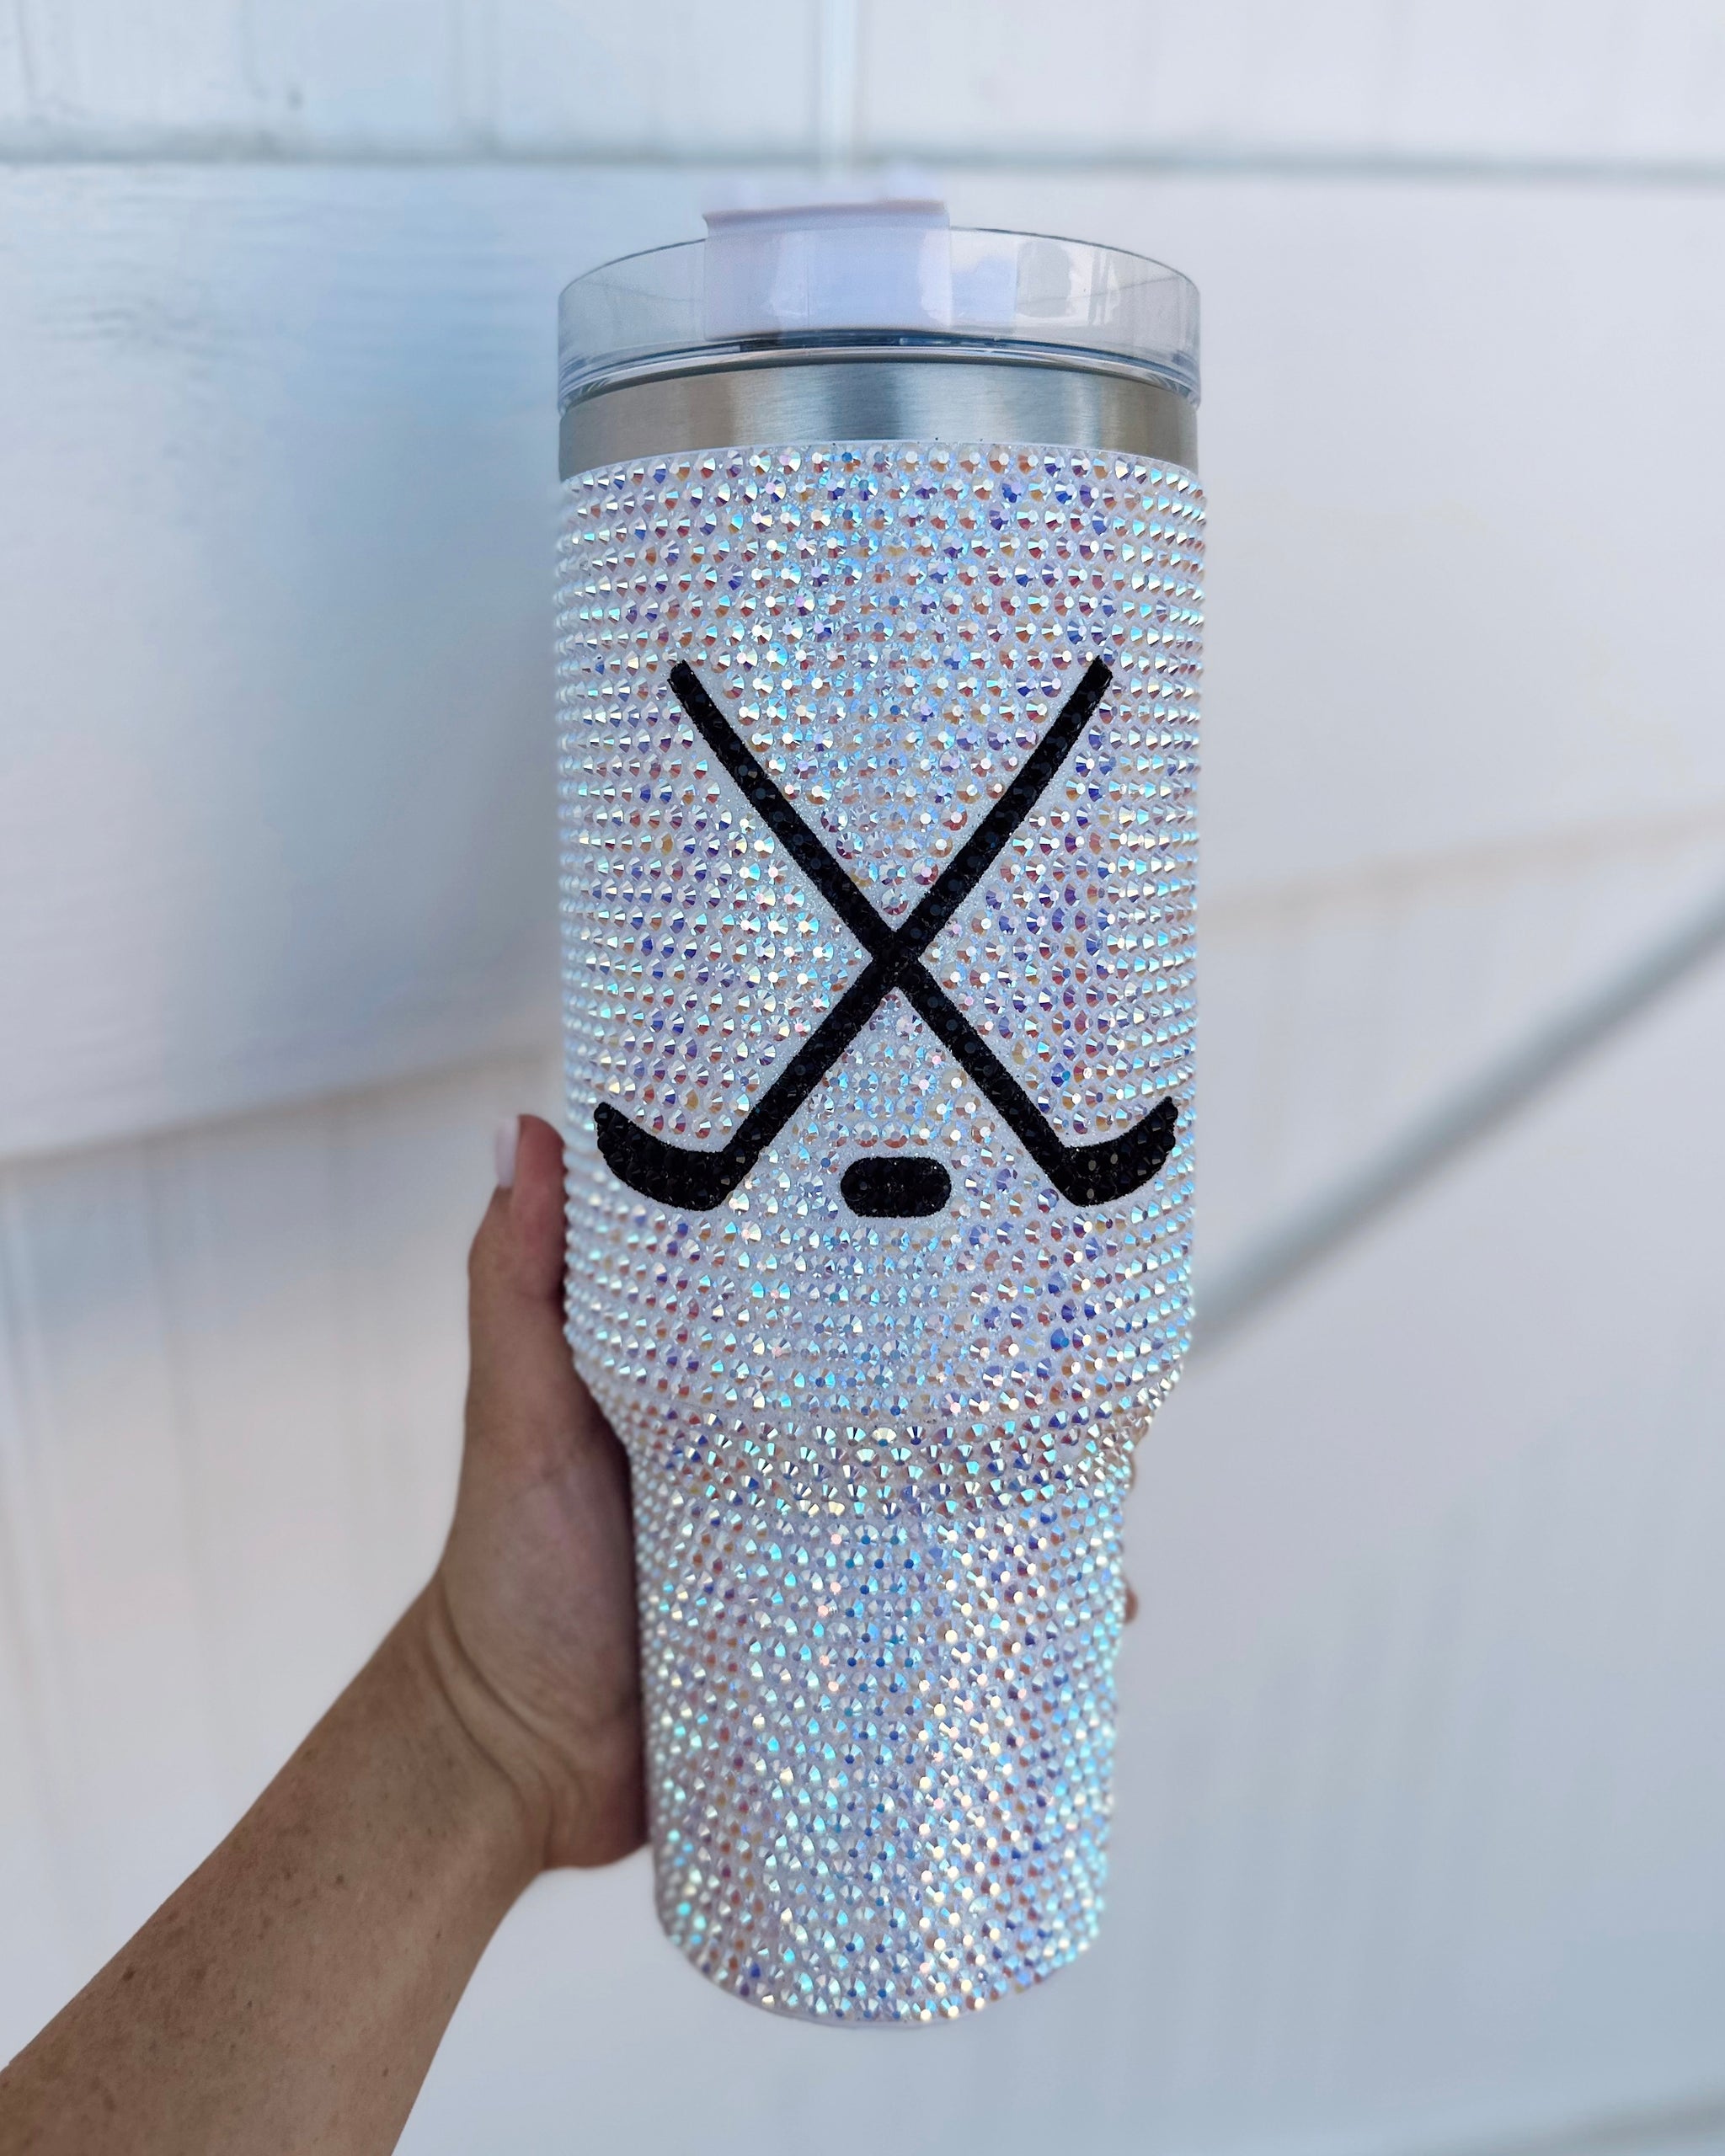 Crystal Baseball White/Red Blinged Out 40 Oz. Tumbler (Ships Approx. 1/30)